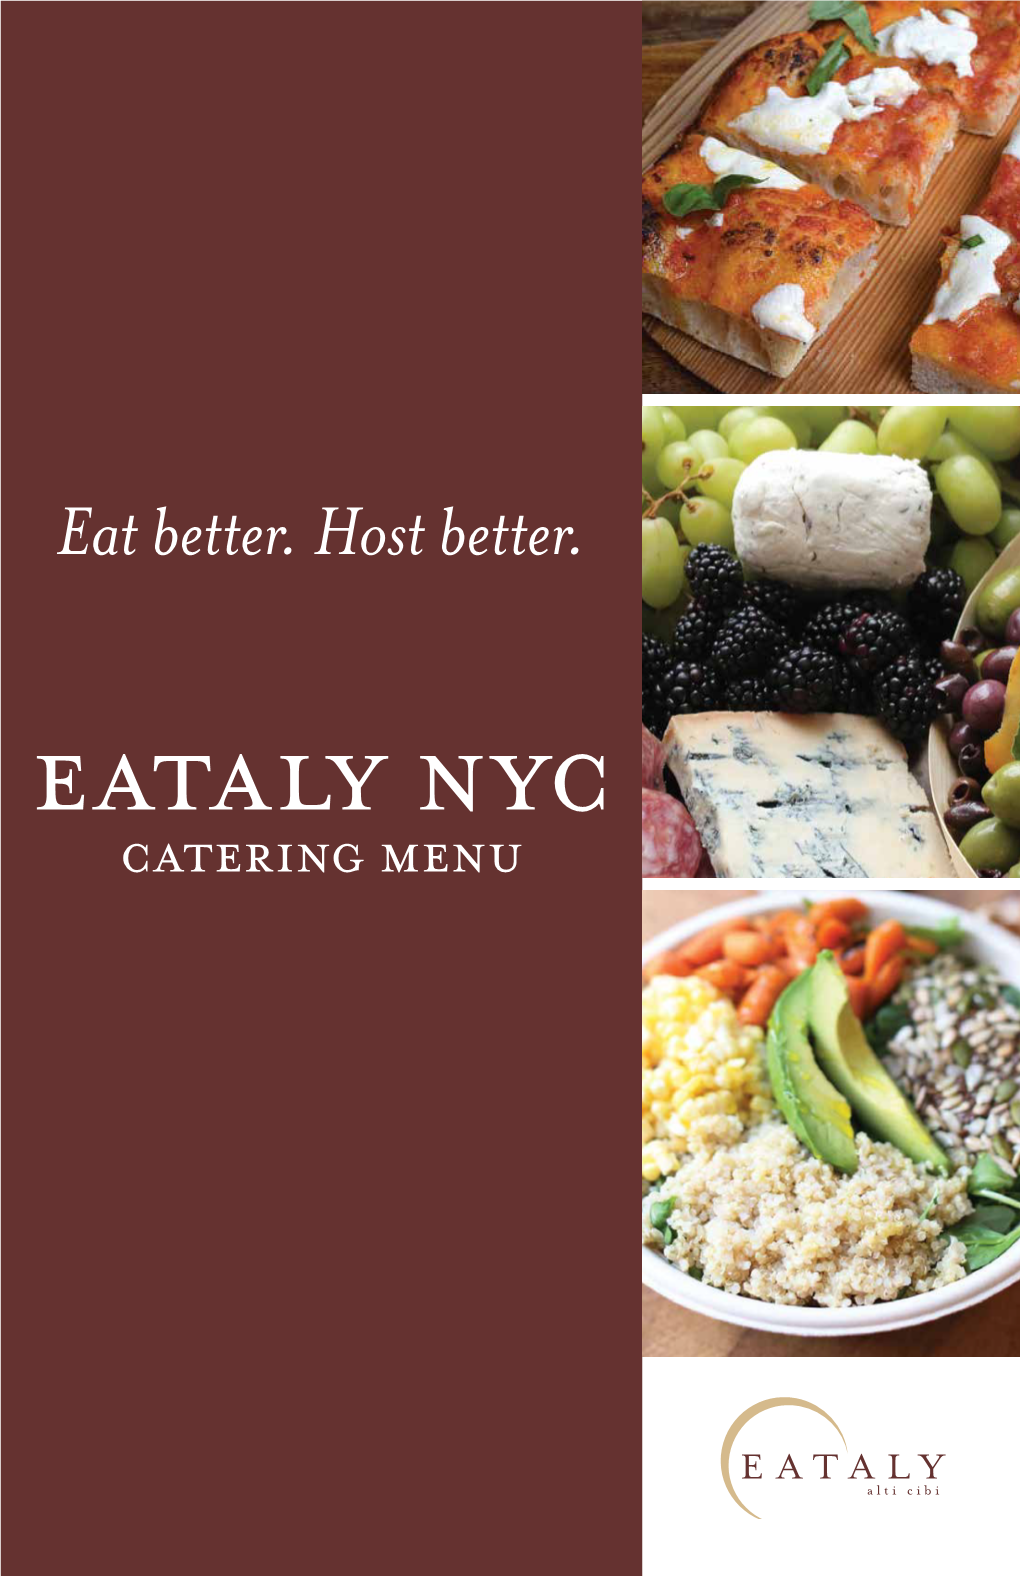 EATALY Nyc Catering Menu